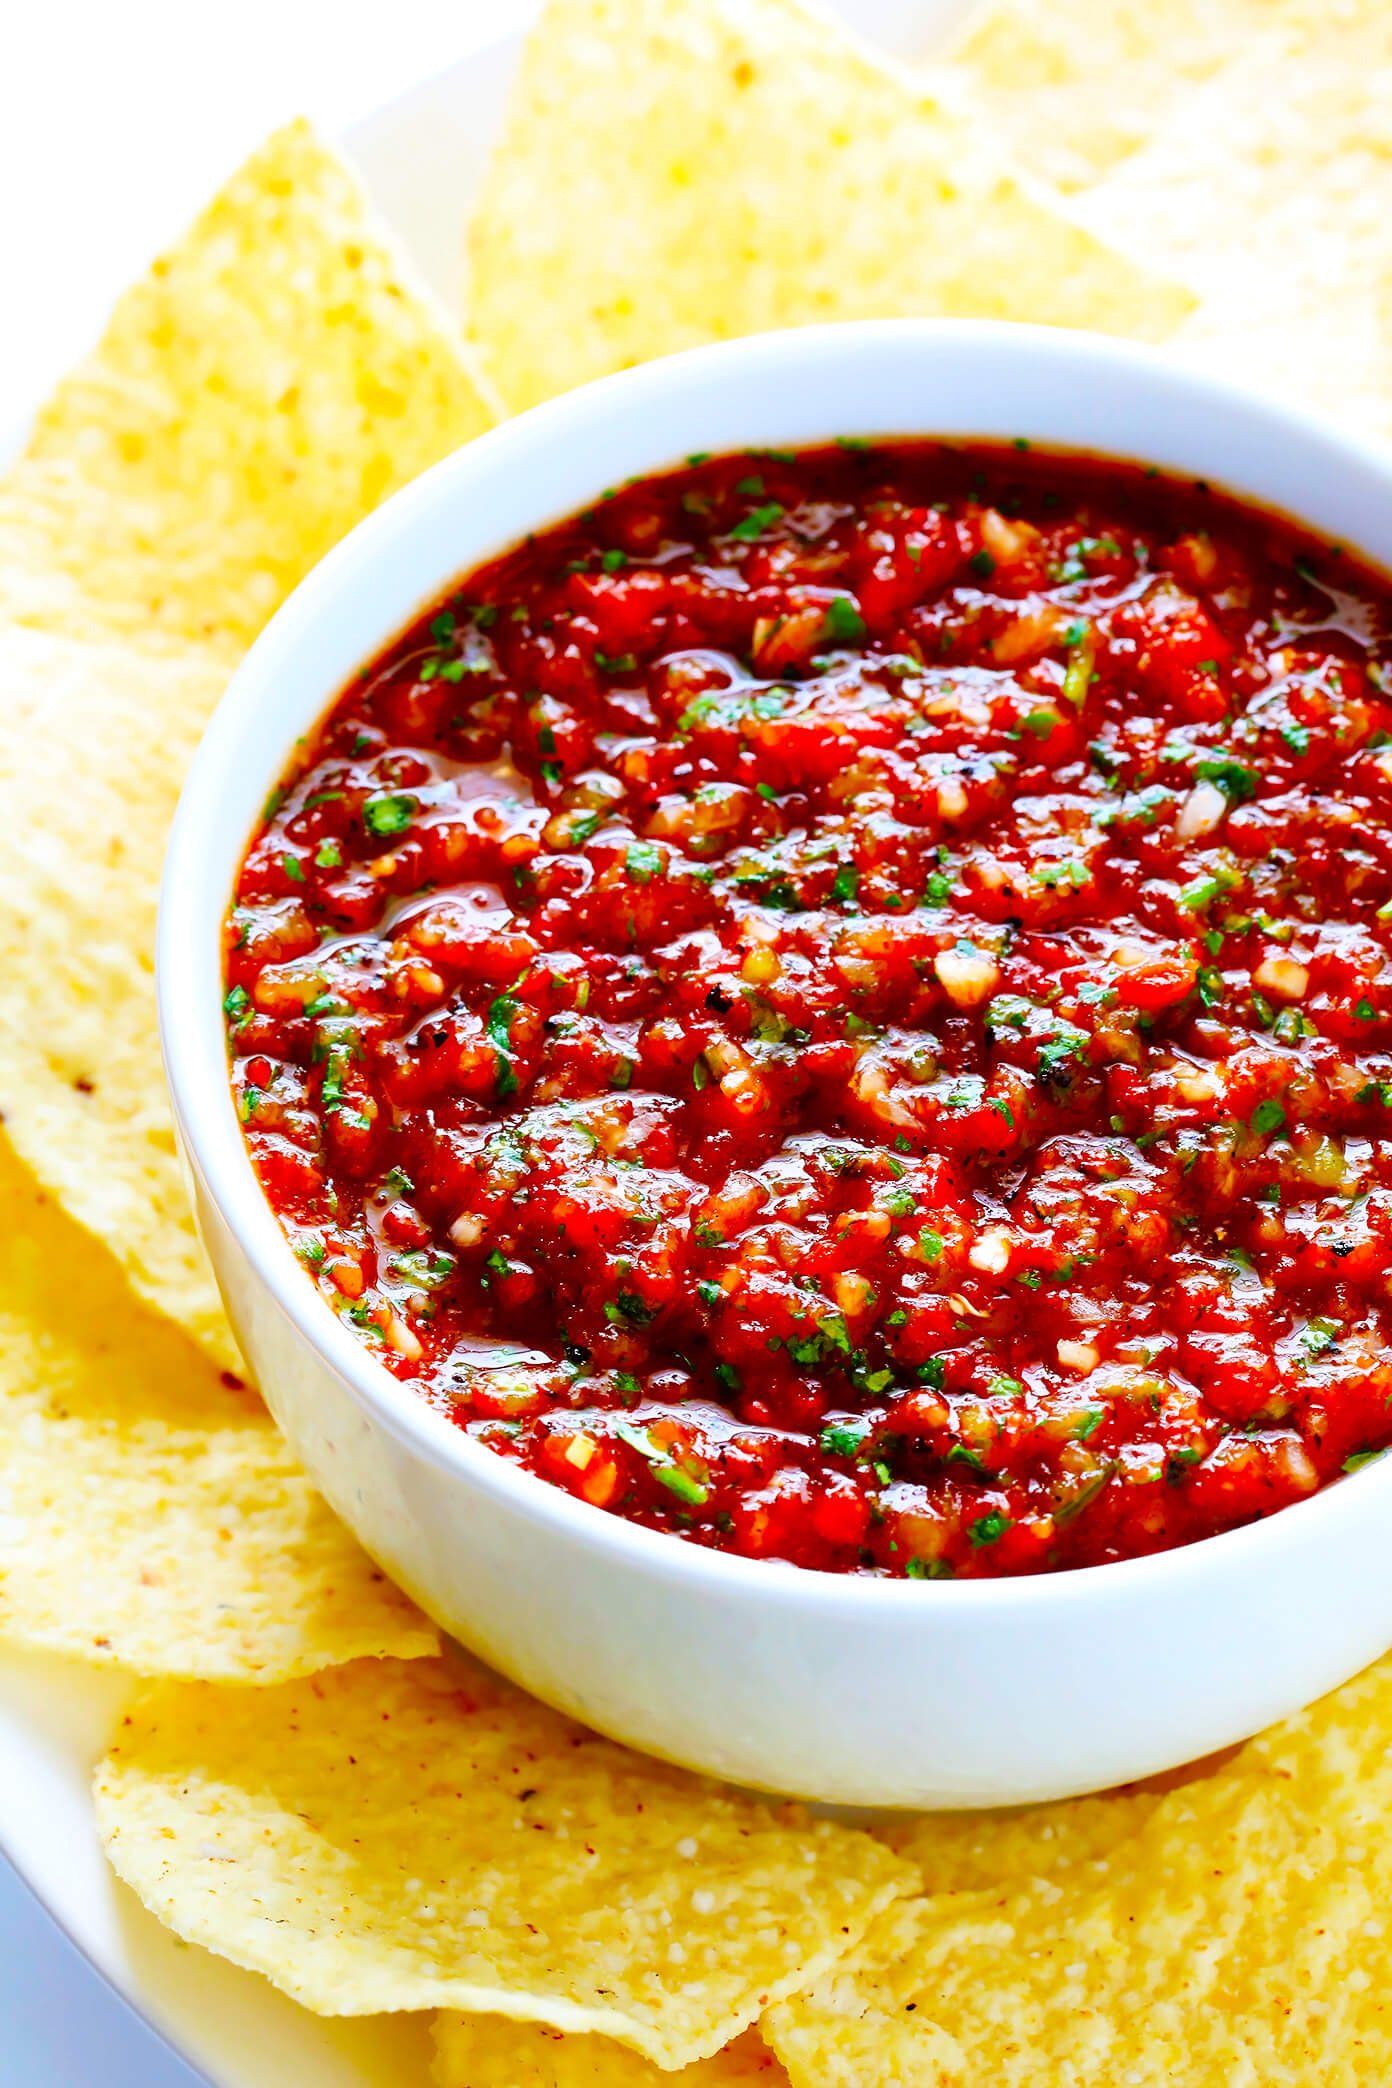 Chips and homemade restaurant-style salsa